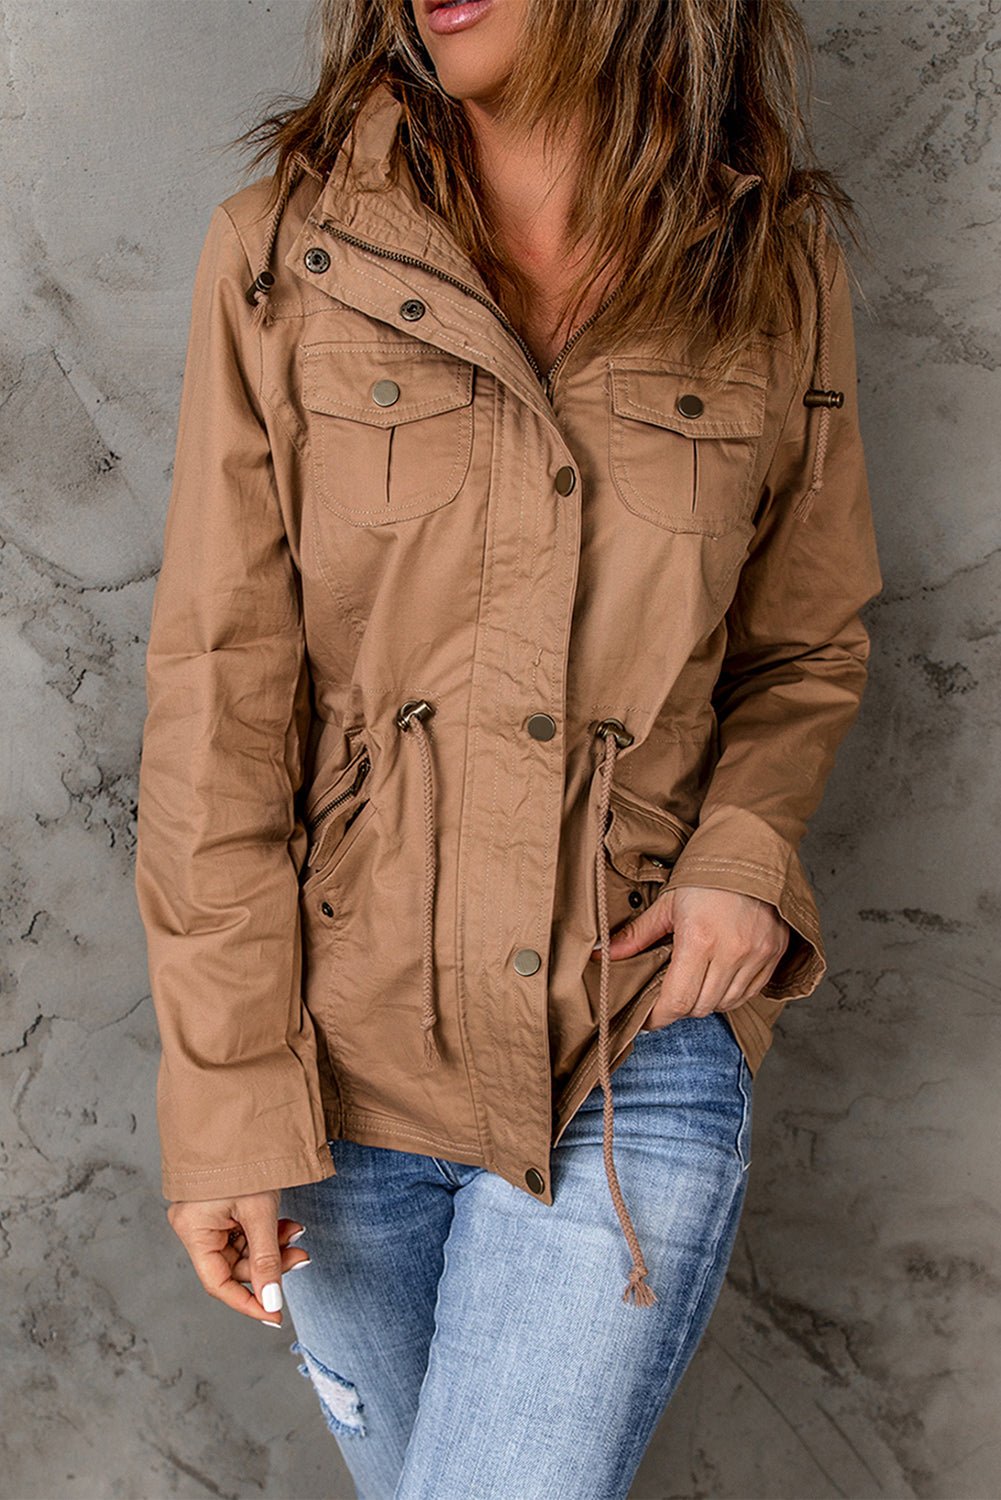 Drawstring Waist Hooded Jacket with Pockets - Fashion Girl Online Store